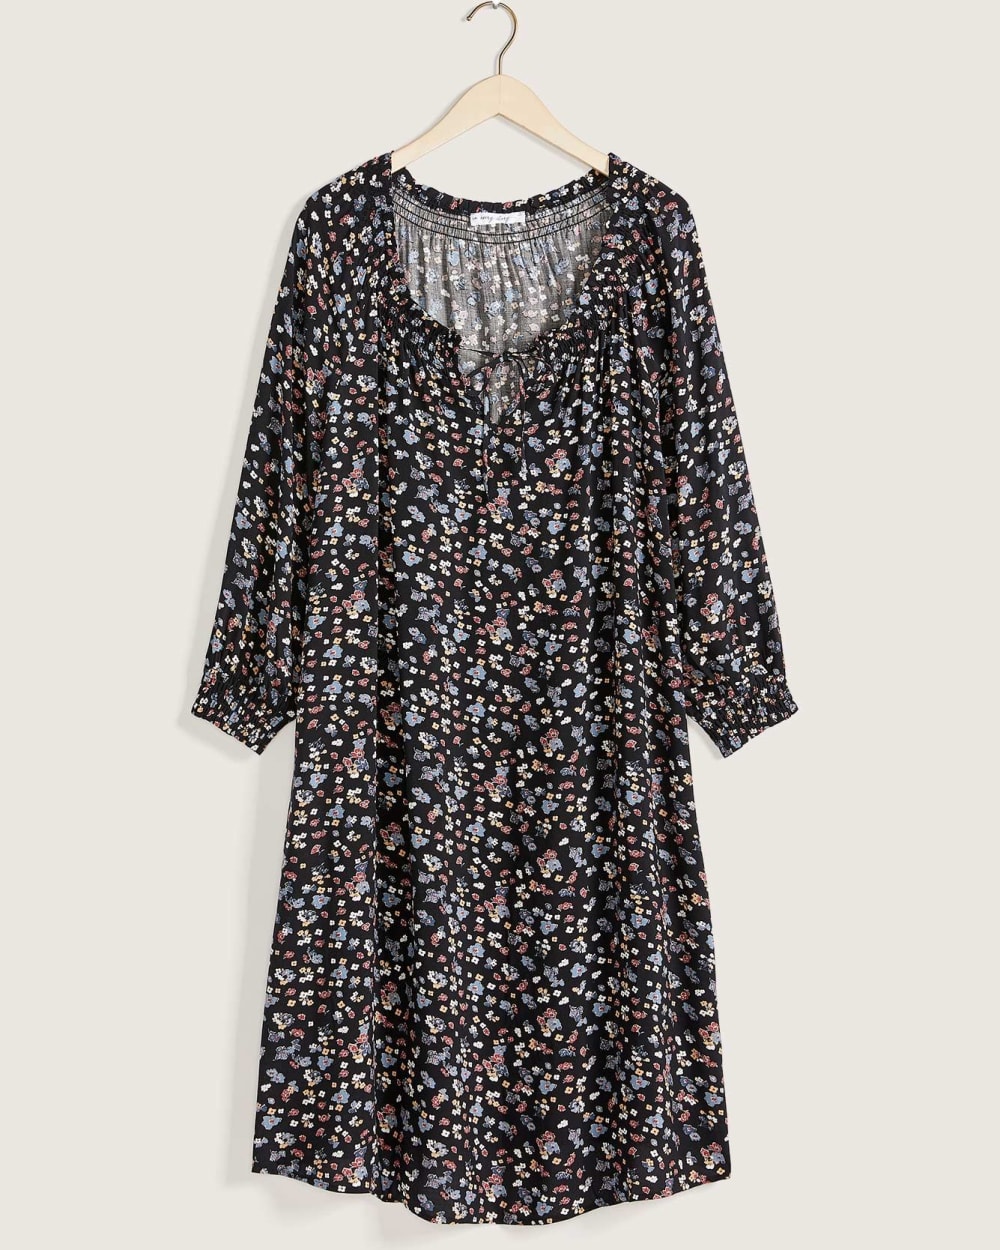 Printed Peasant Dress With Smocking Details - In Every Story | Penningtons